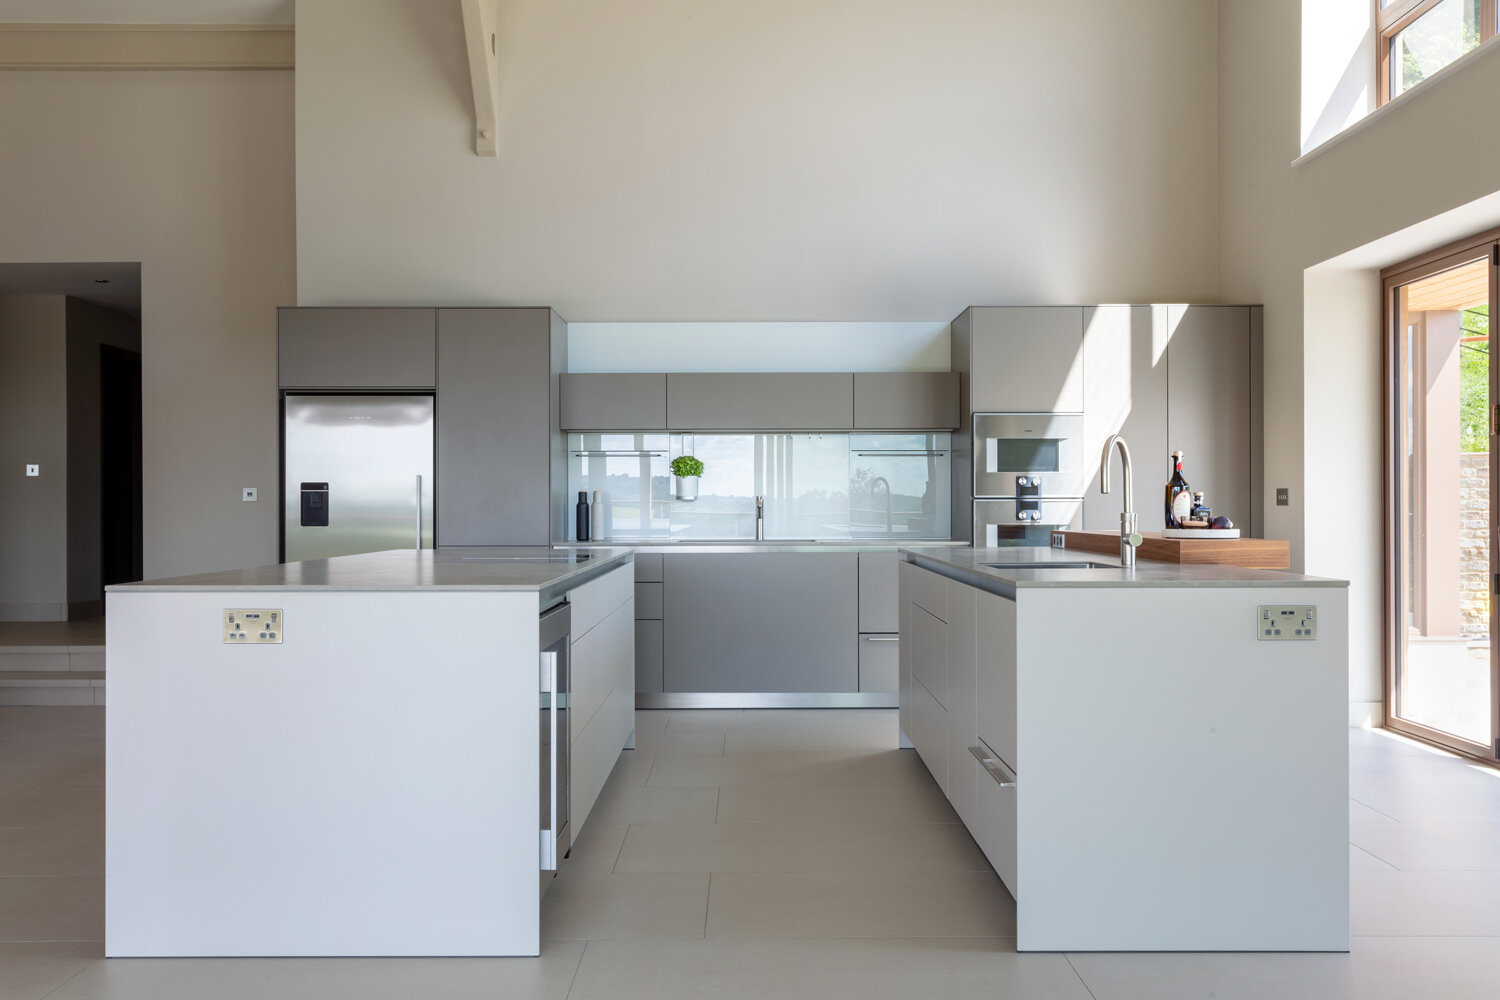 How Much Does A Bulthaup Kitchen Cost